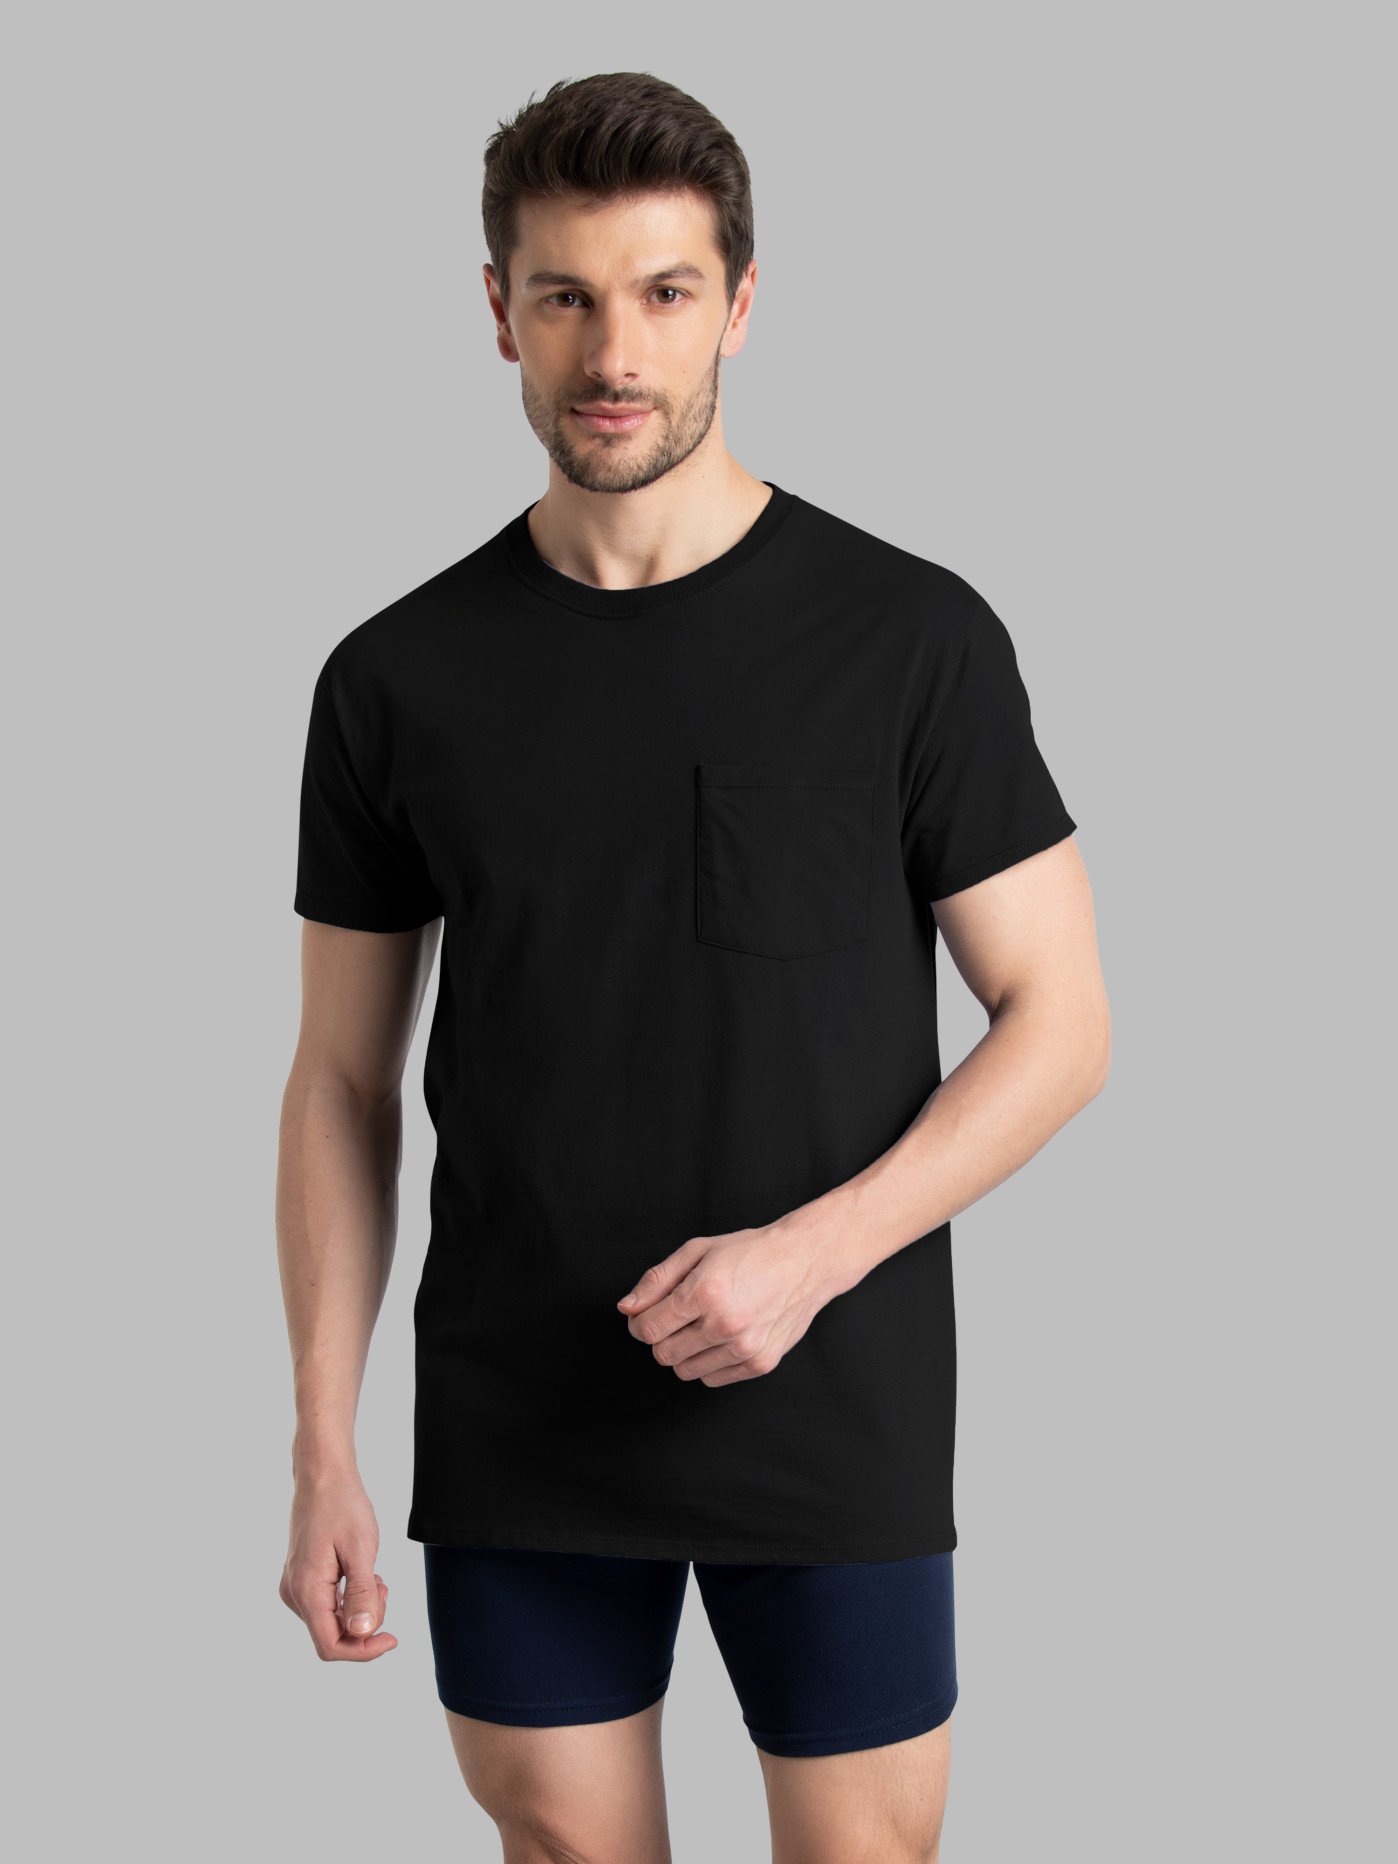 37 Fashionable Long Sleeve T-Shirts Outfit For Men  Mens casual outfits,  Best business casual outfits, Mens outfits